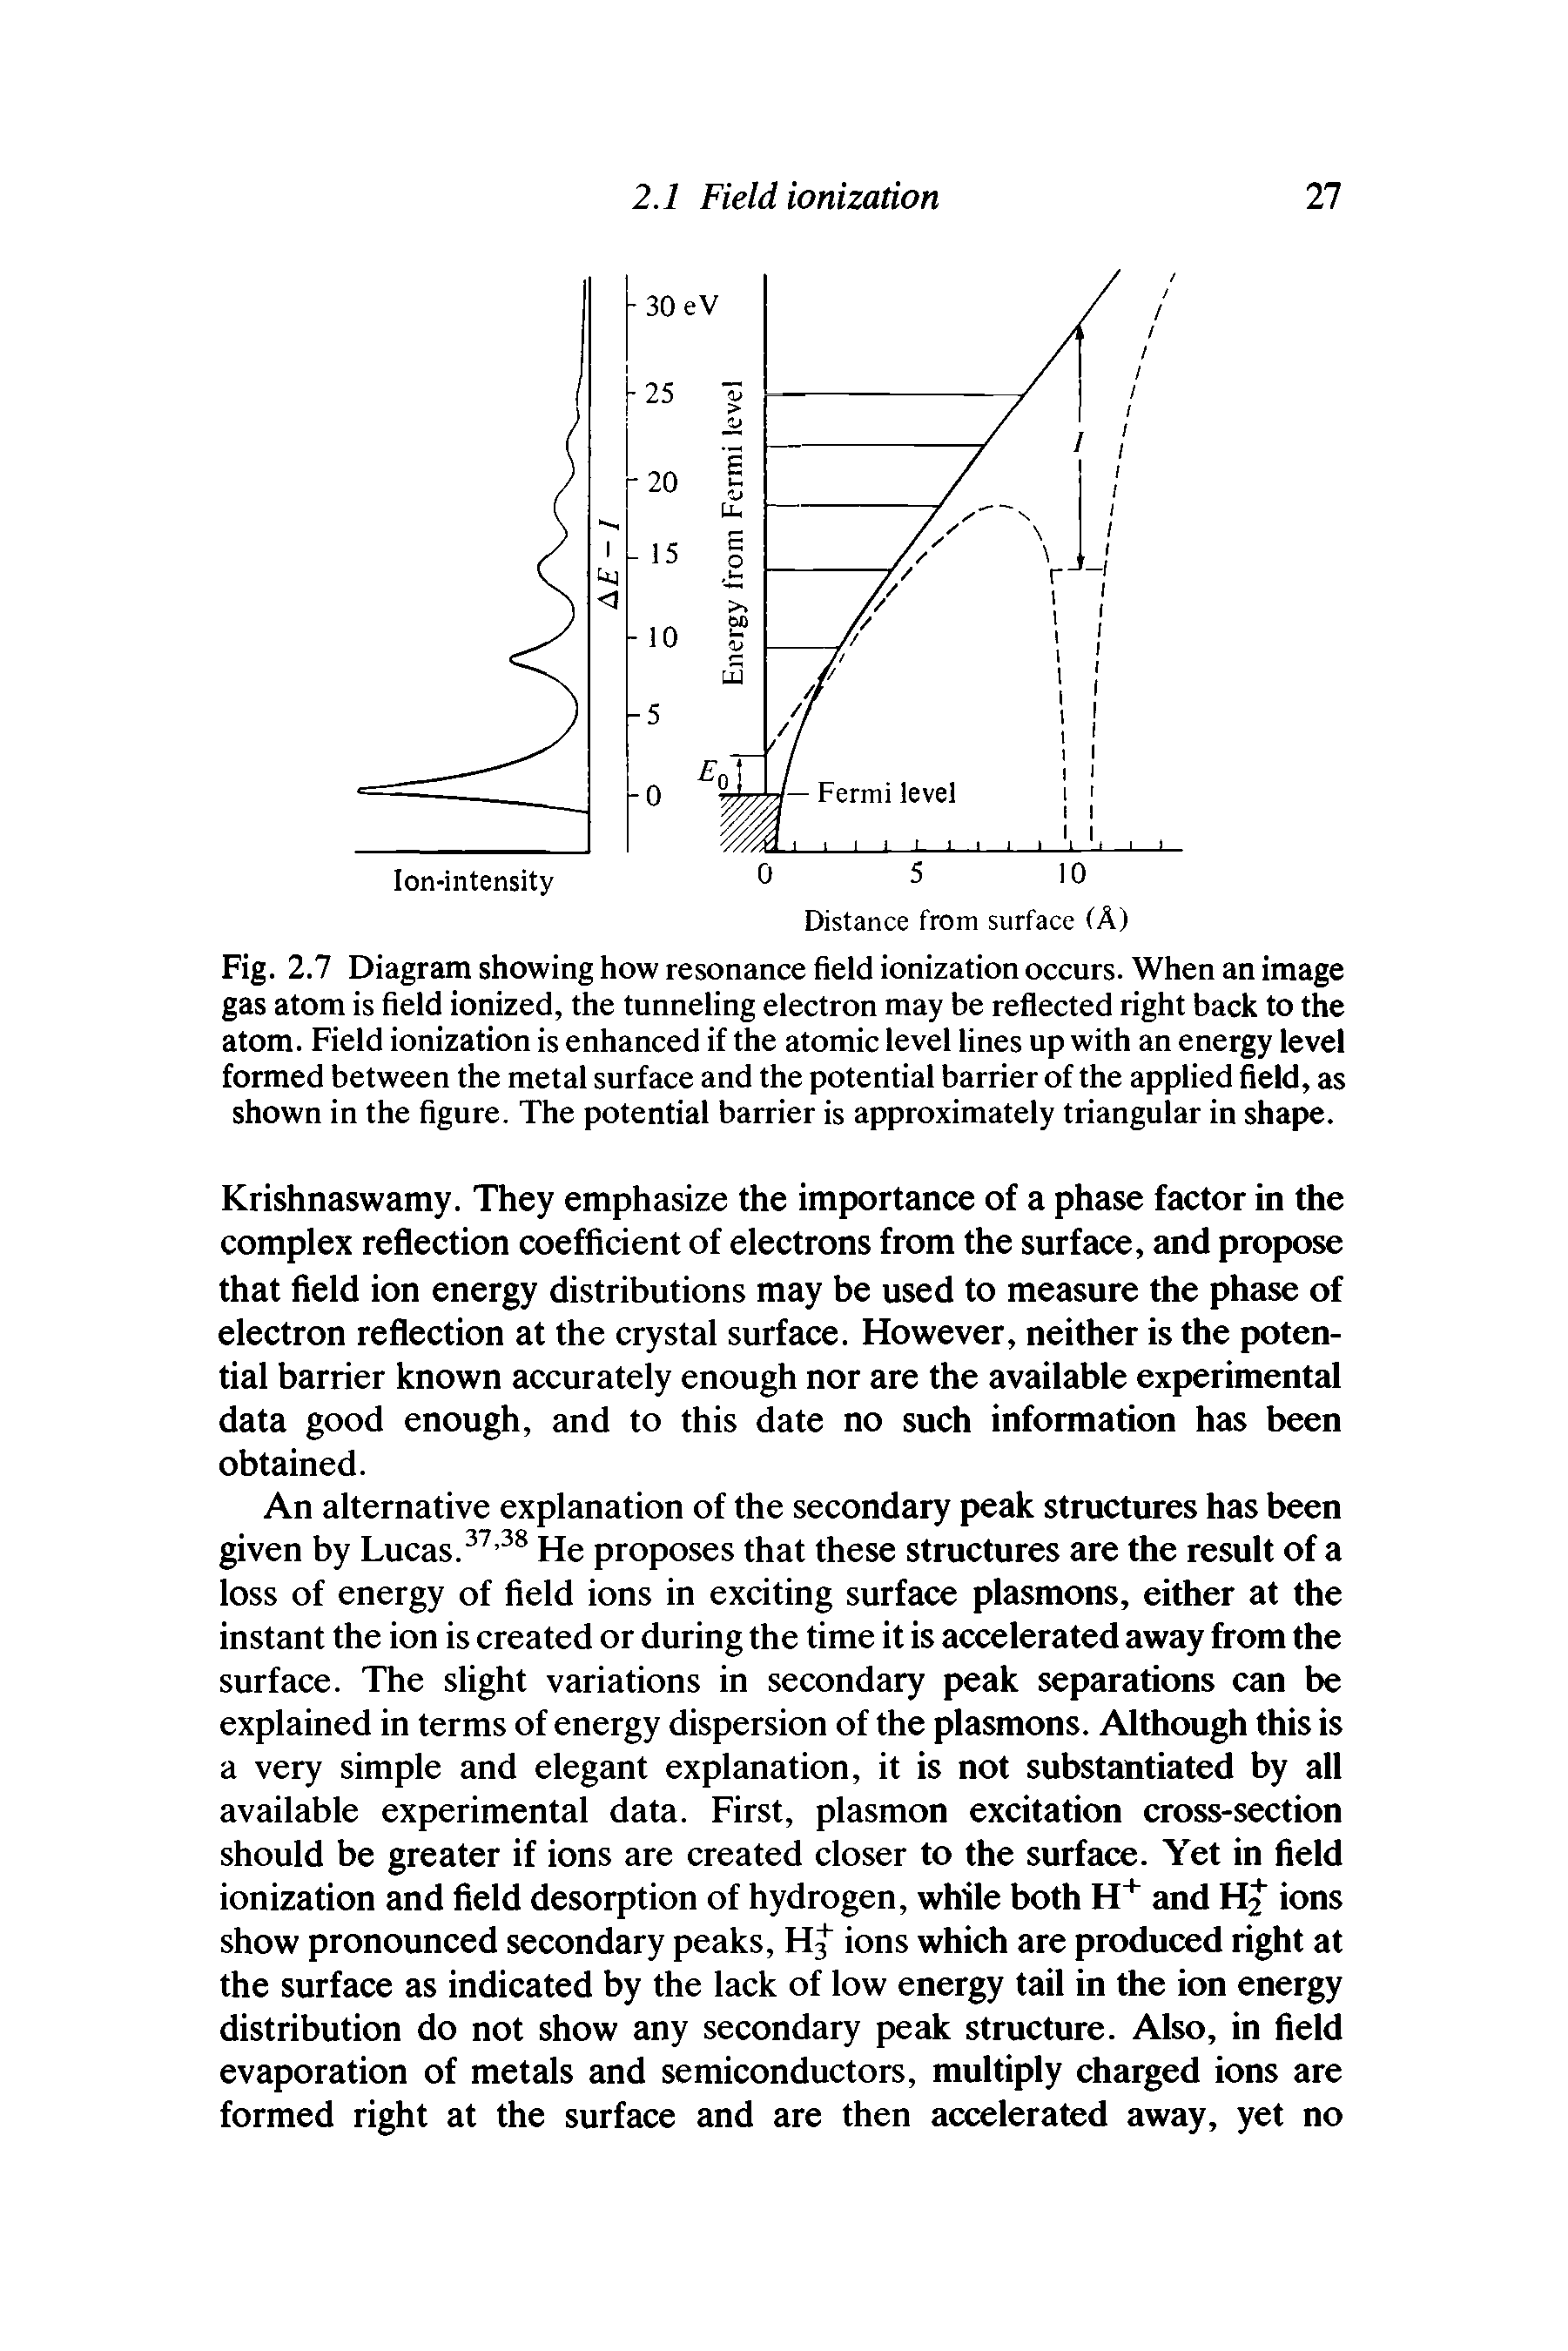 Fig. 2.7 Diagram showing how resonance field ionization occurs. When an image gas atom is field ionized, the tunneling electron may be reflected right back to the atom. Field ionization is enhanced if the atomic level lines up with an energy level formed between the metal surface and the potential barrier of the applied field, as shown in the figure. The potential barrier is approximately triangular in shape.